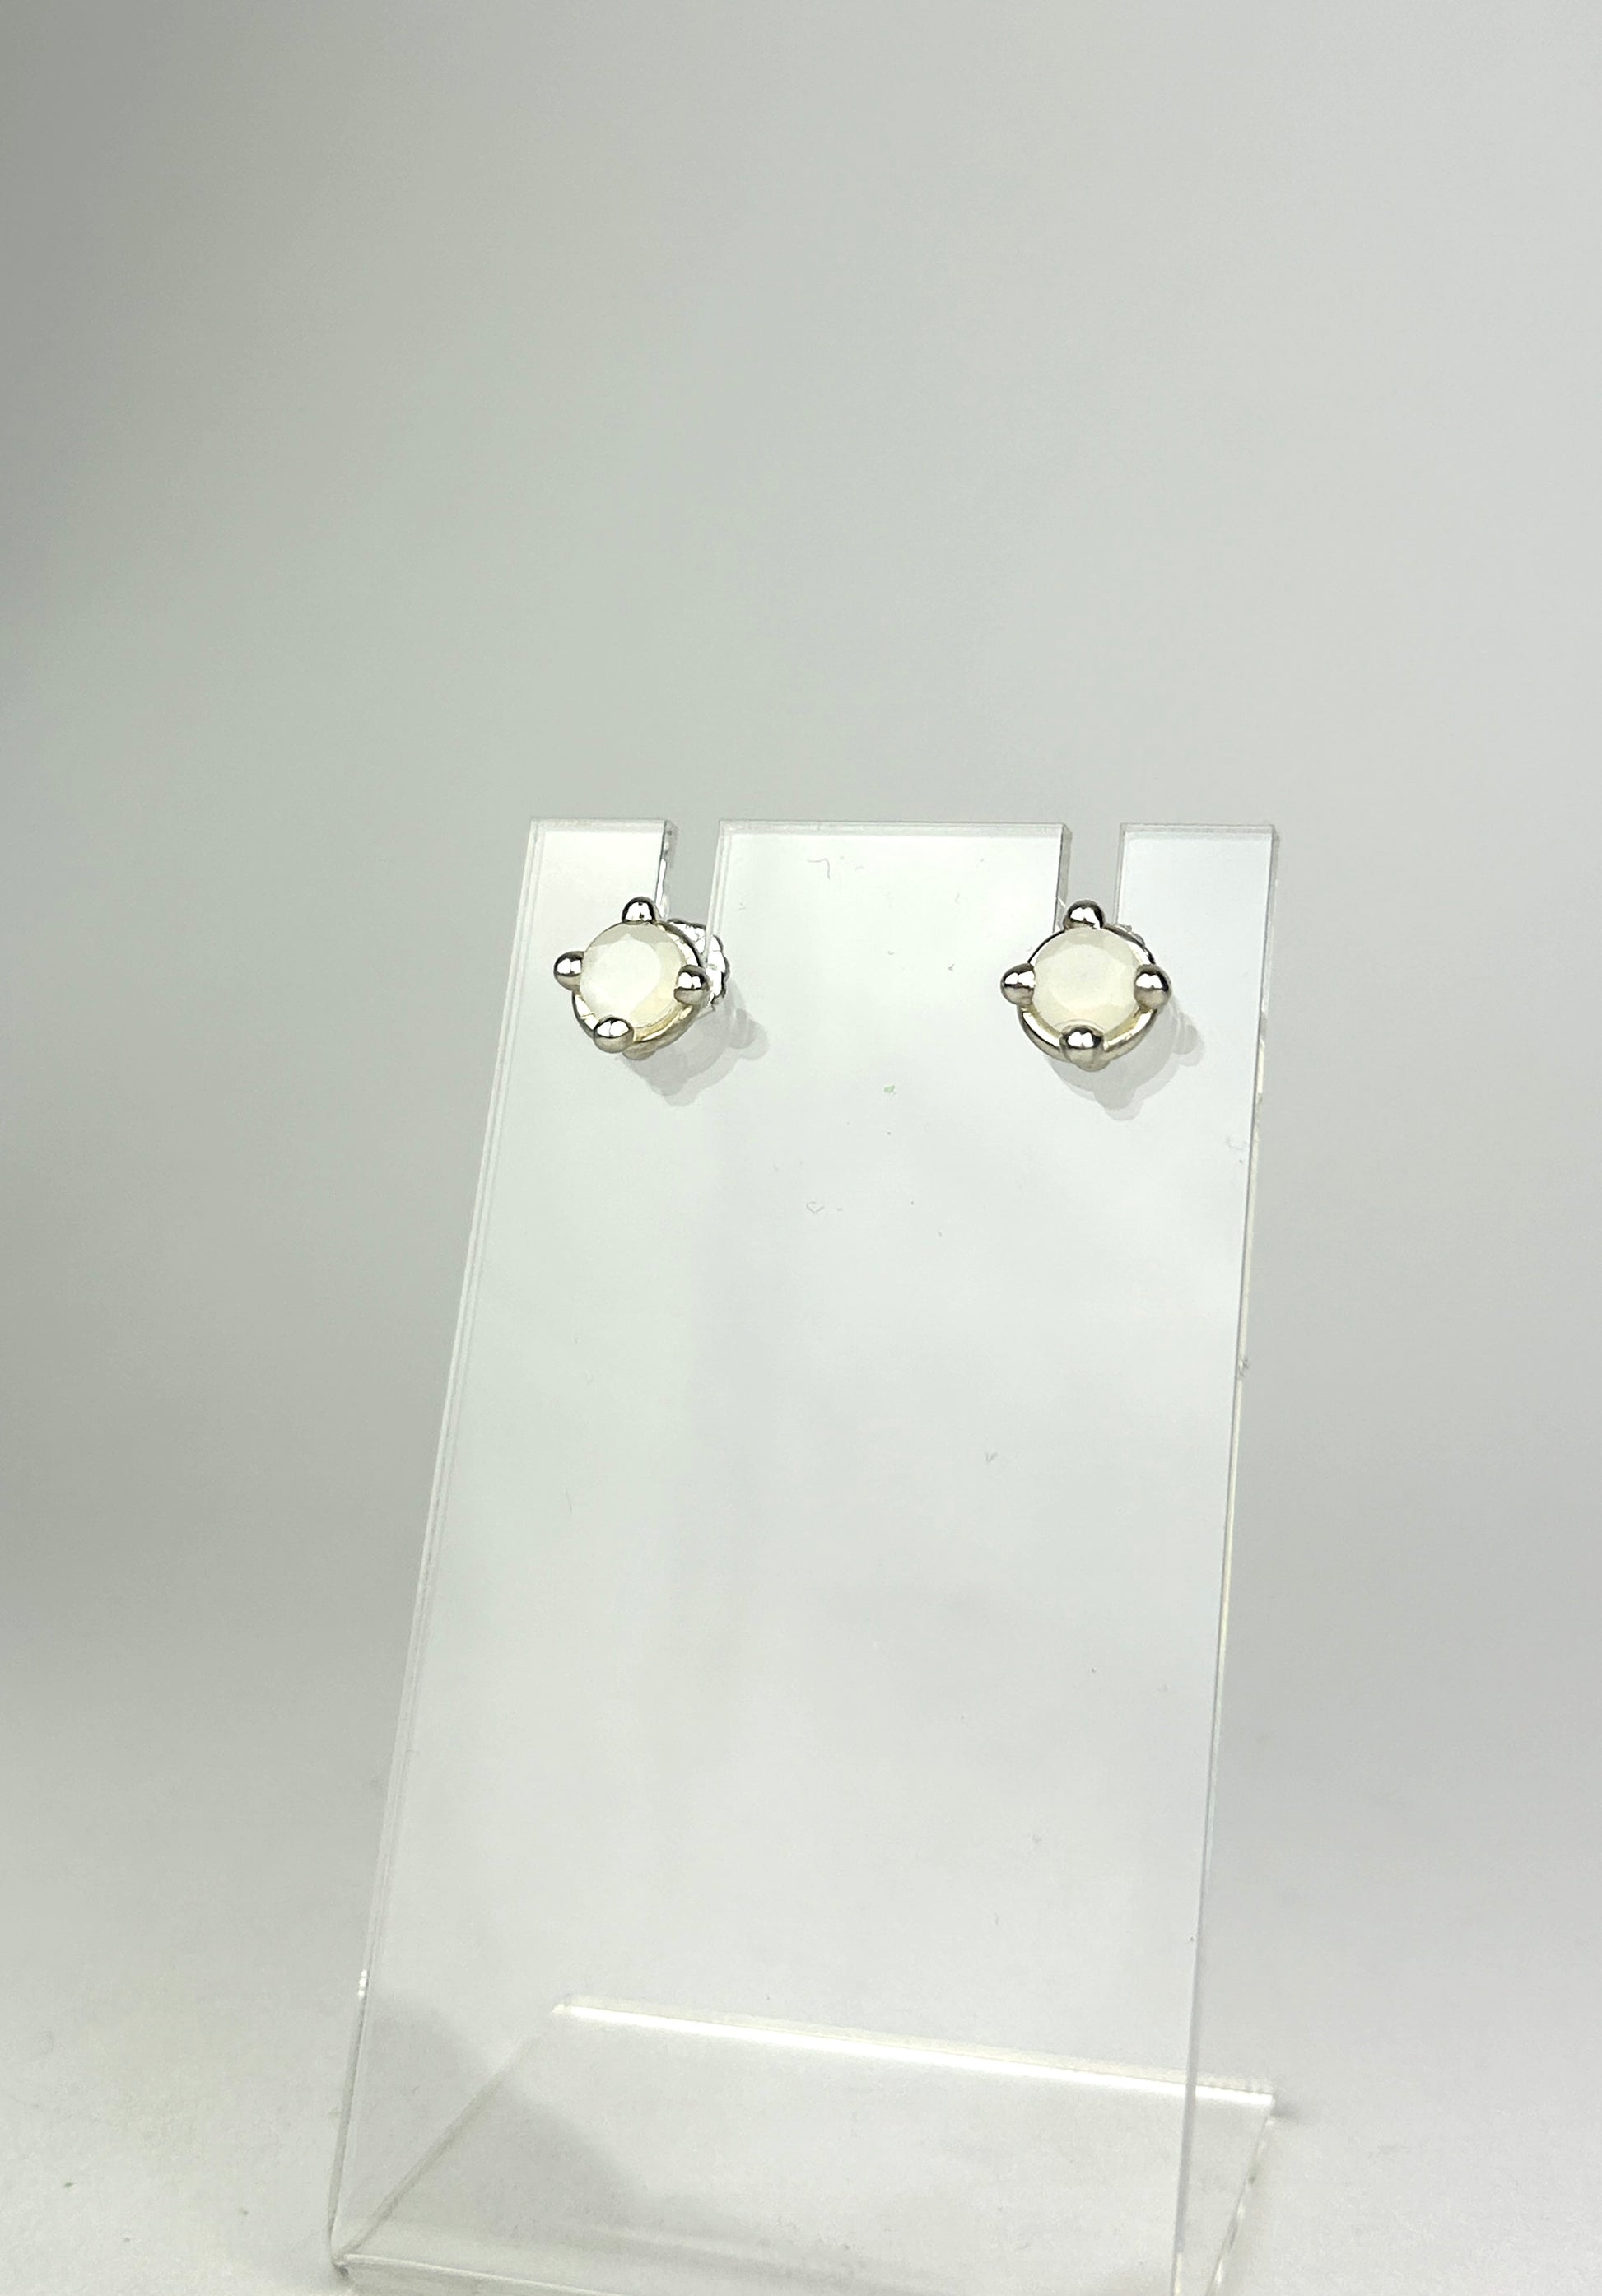 Front view of sterling silver earrings with balls for prongs, holding 6mm milky white moonstones. They are displayed on a clear acrylic jewelry display infront of a white background.